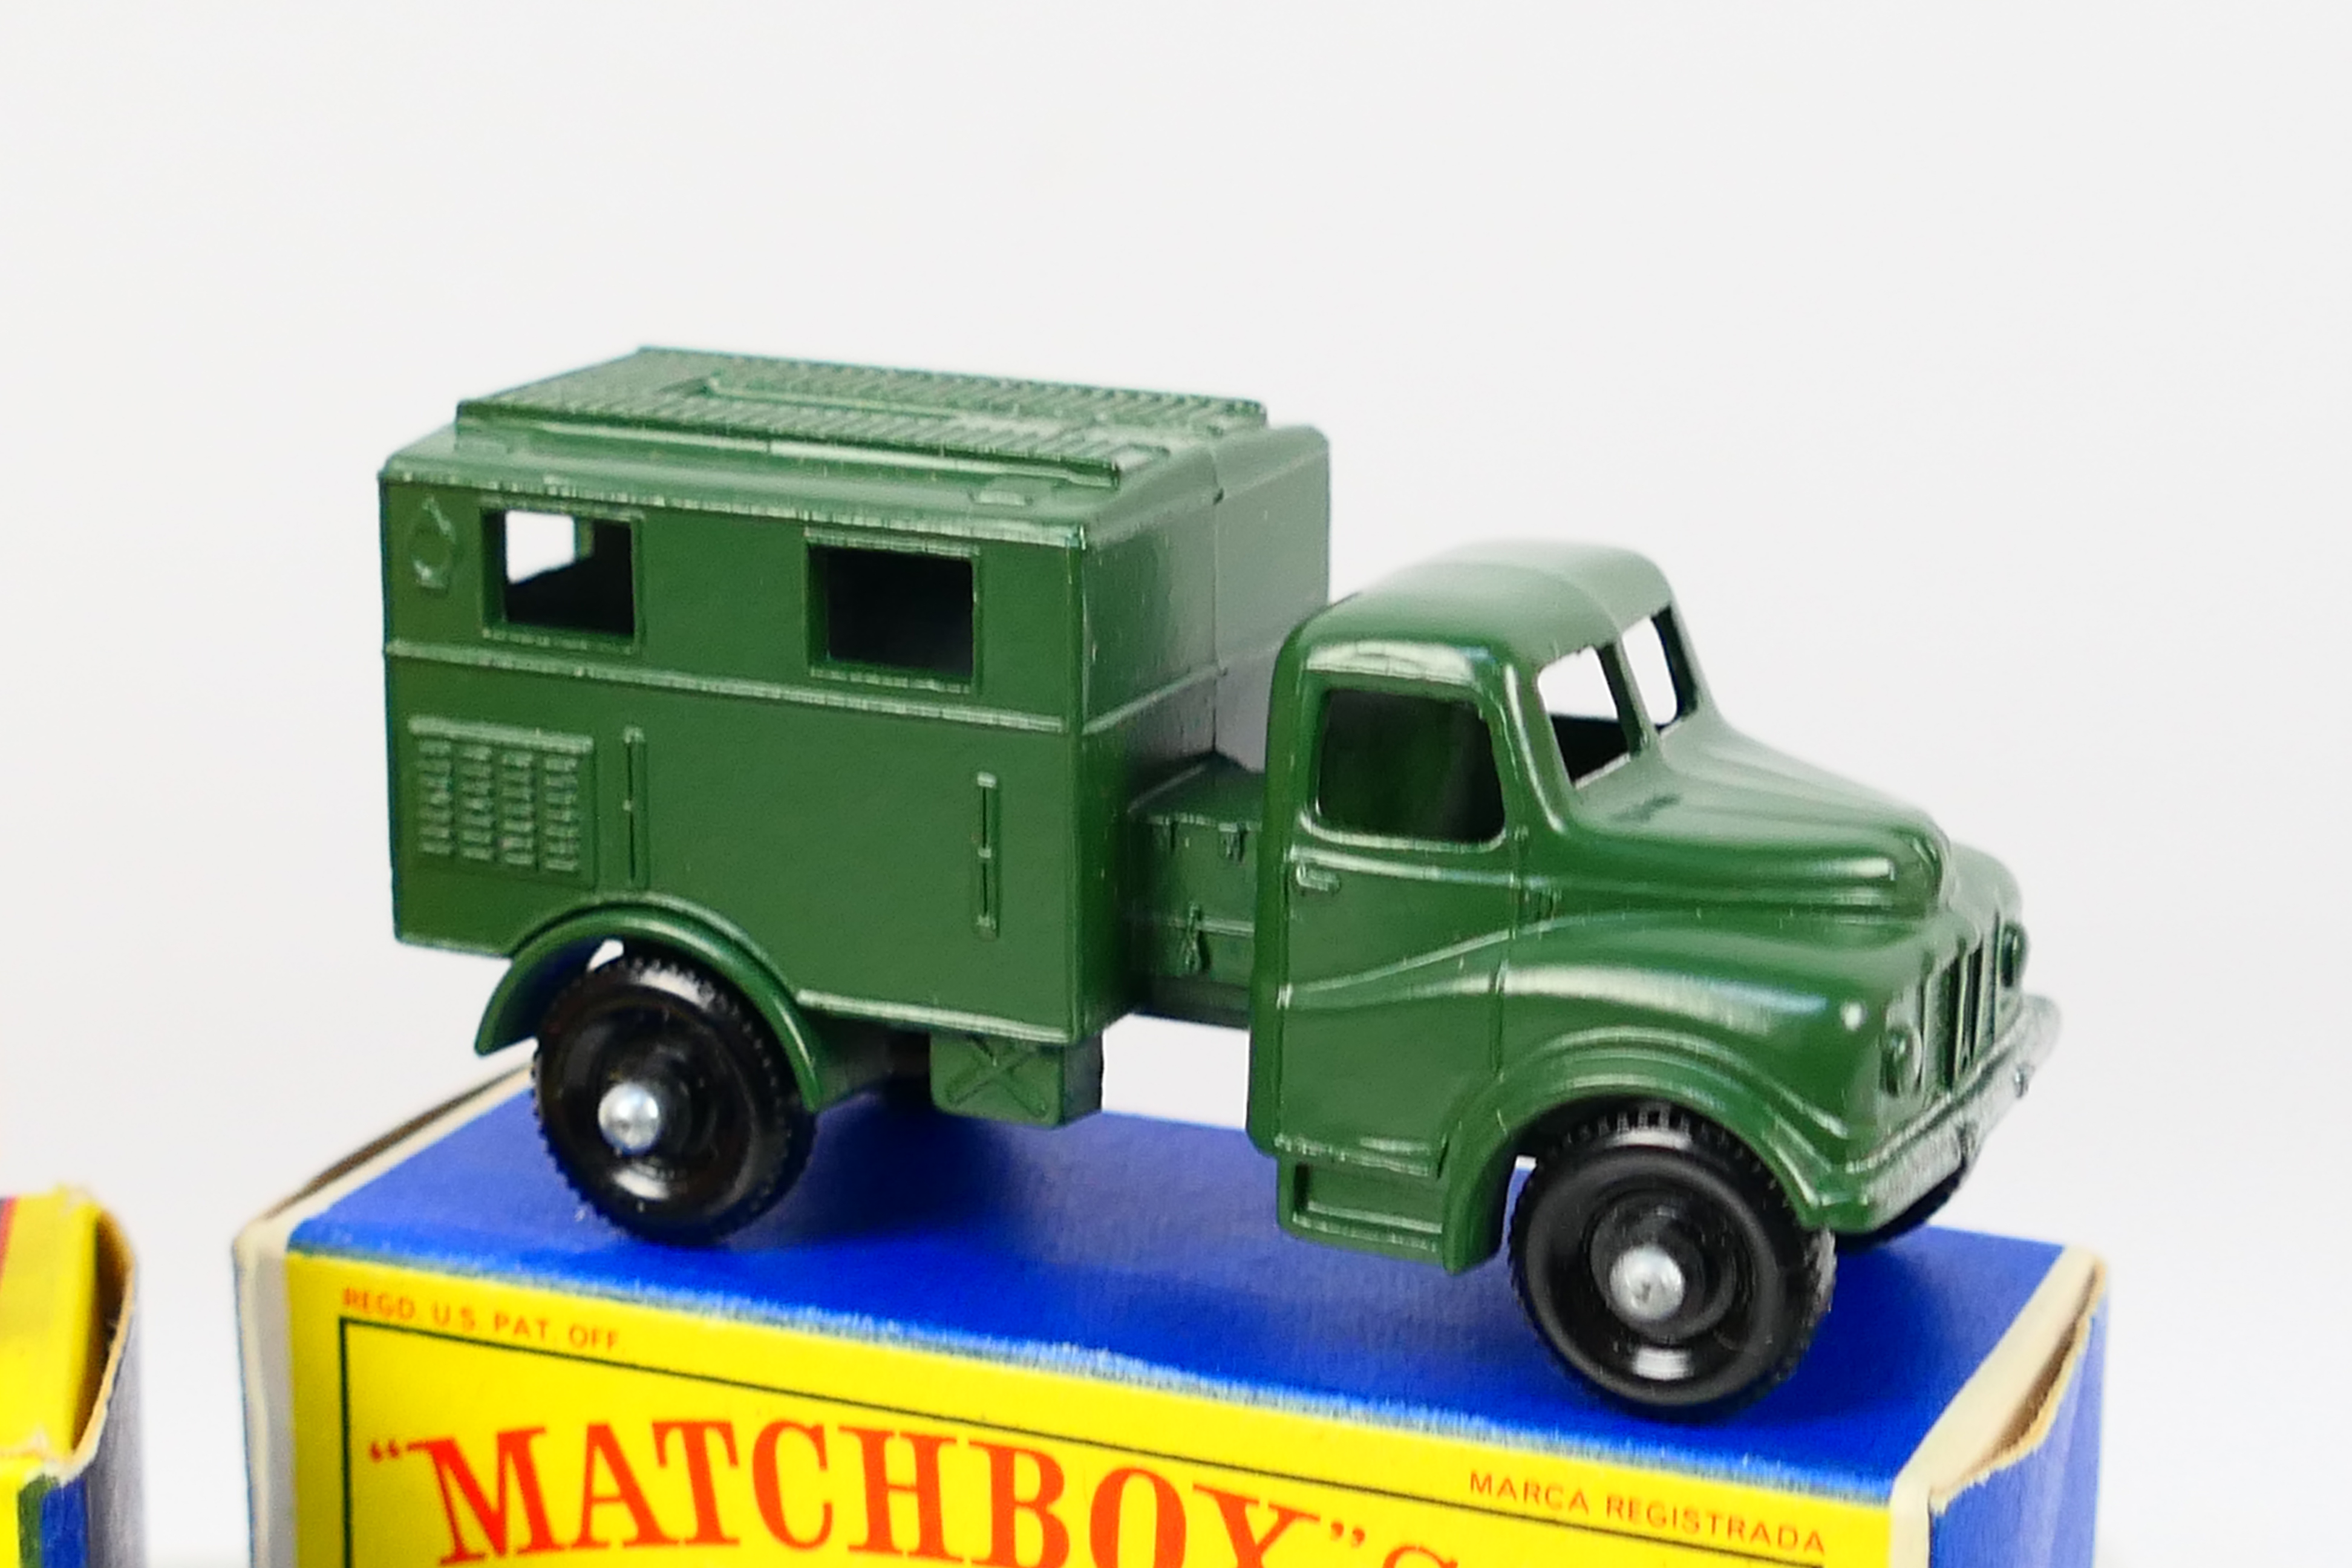 Matchbox - 3 x boxed models, Merryweather Marquis Fire Engine # 9, Weatherill Hydraulic Loader # 24, - Image 4 of 6